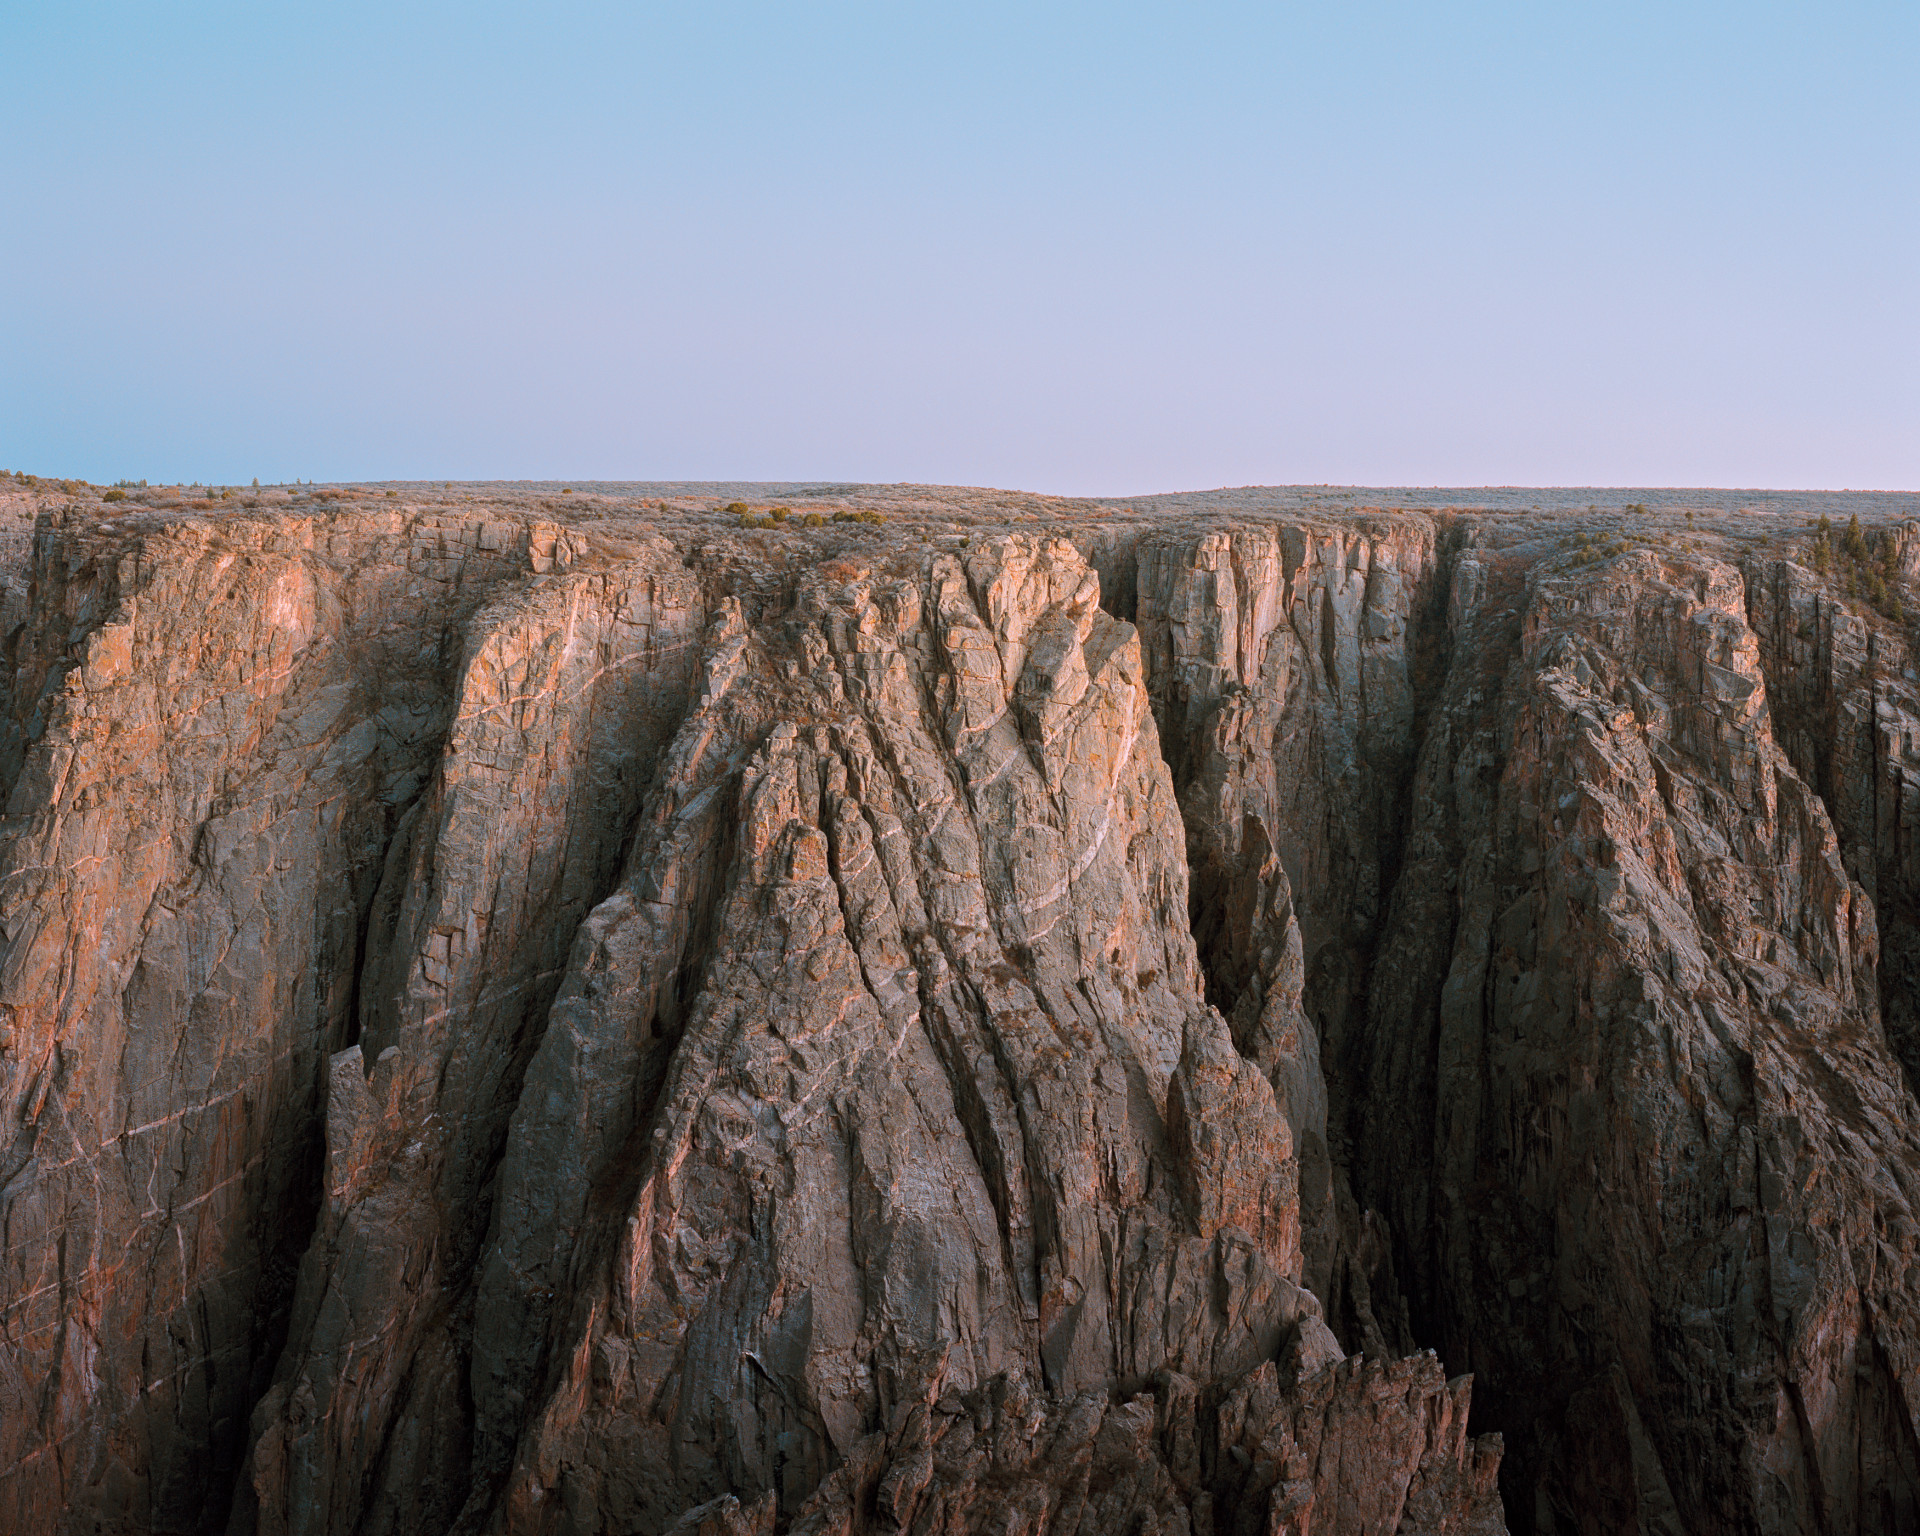 A photograph of a rugged rock formation, flat on the top where it meets the blue sky